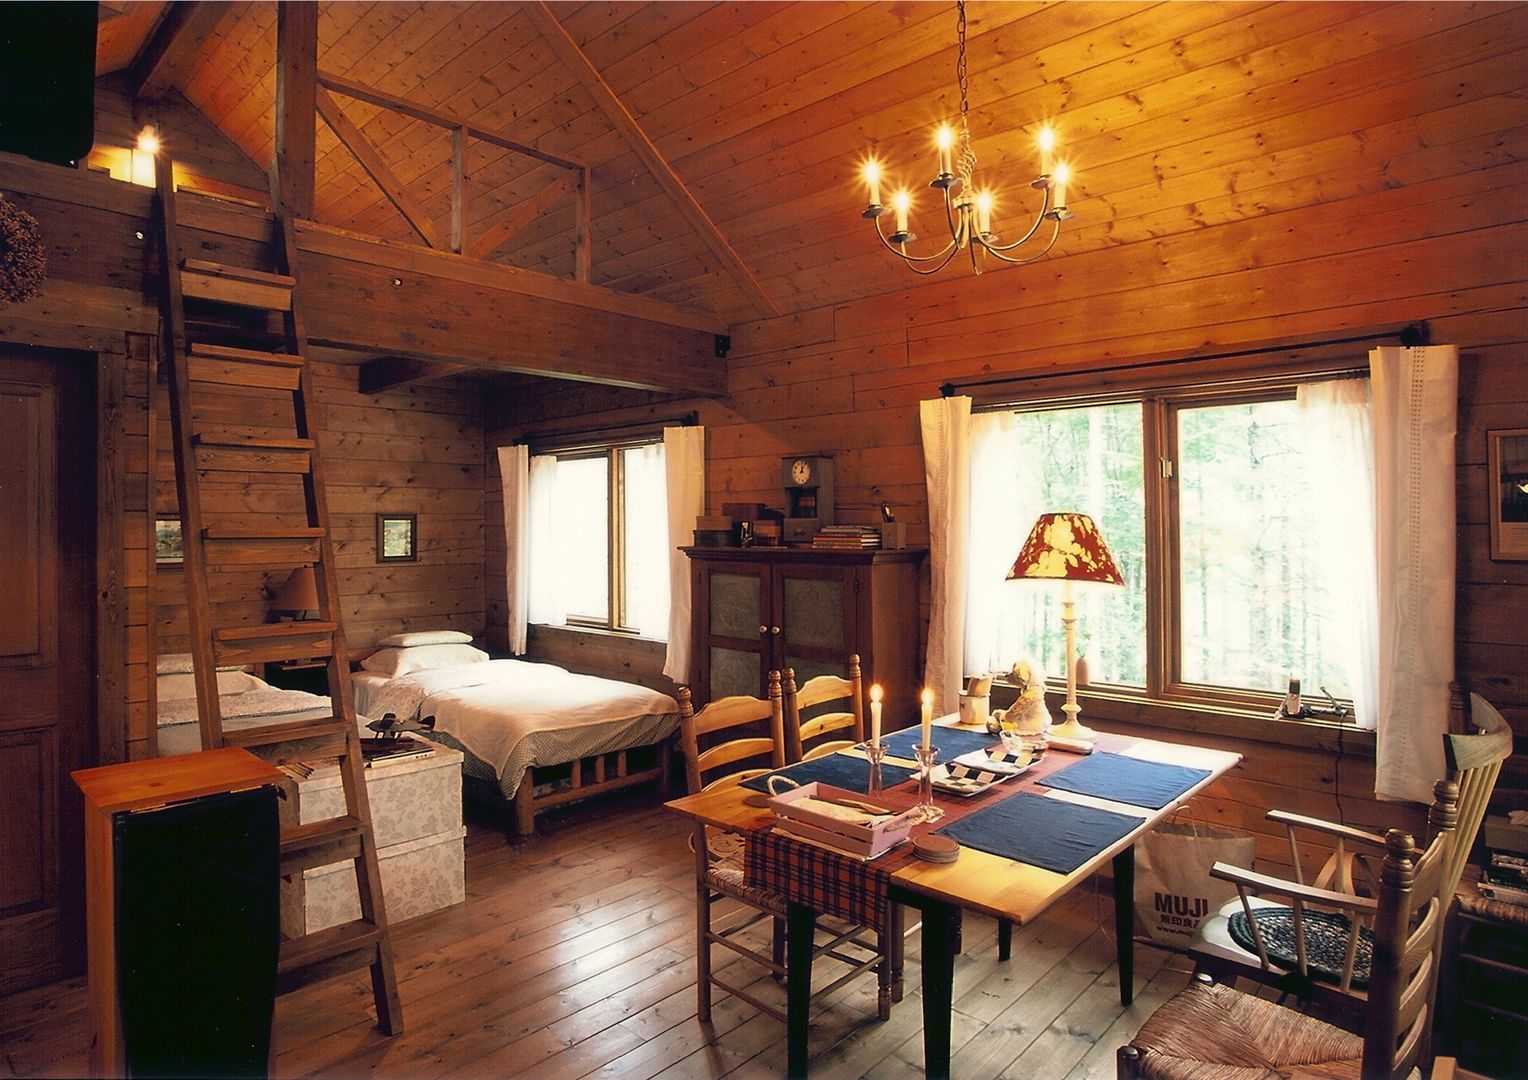 Small Cottage at Mt.Yatsugatake, Japan, Cottage Style / コテージスタイル Cottage Style / コテージスタイル Obývačka